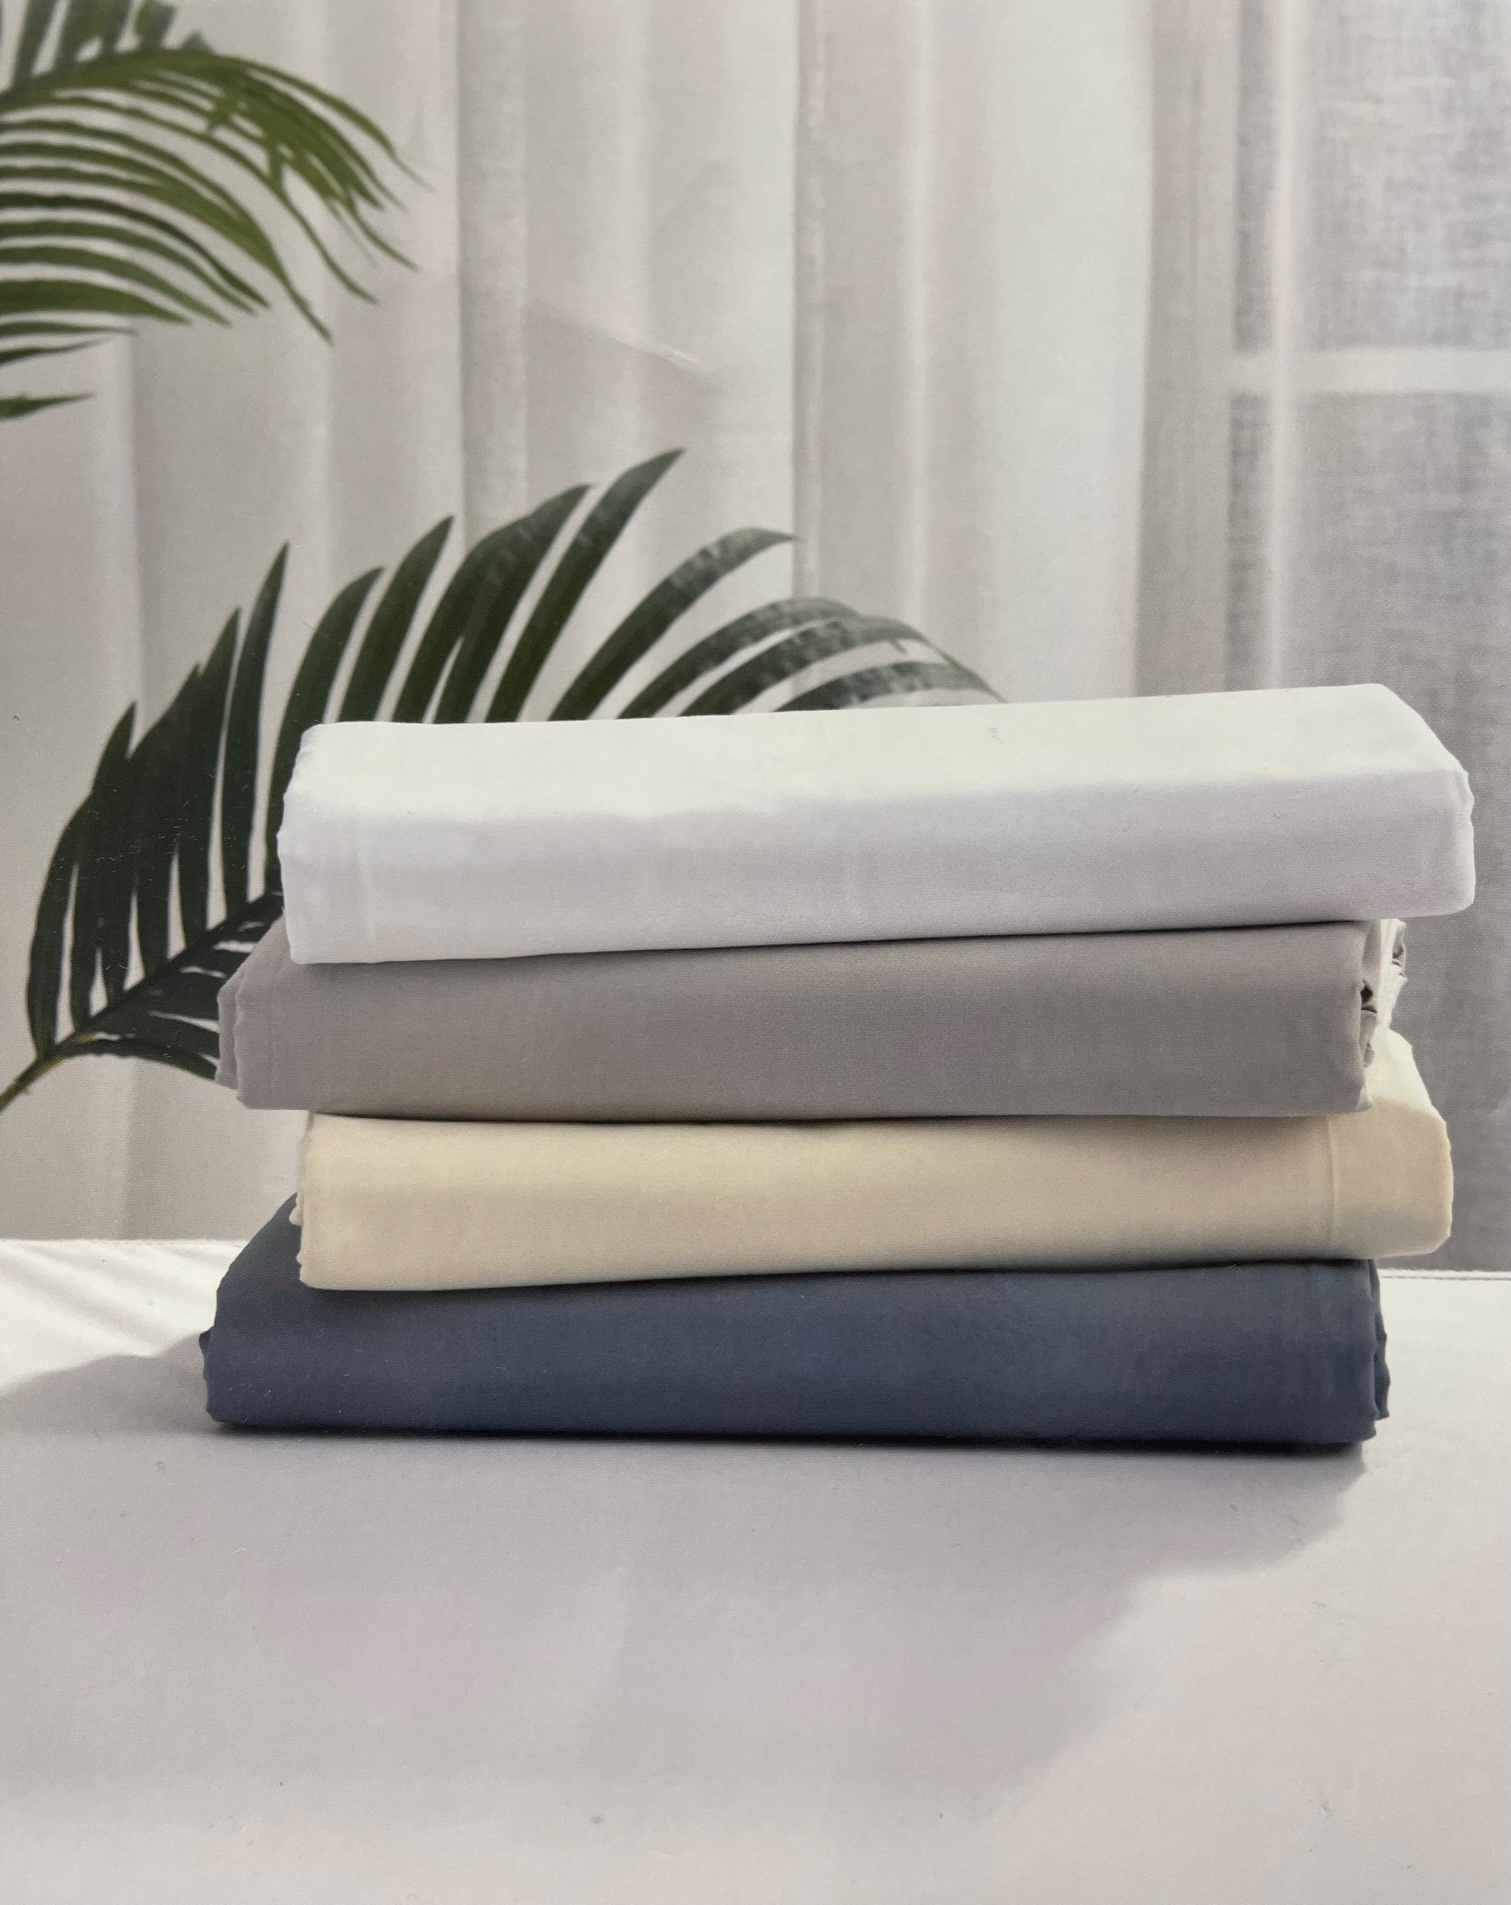 KOUCHINI PERCALE COTTON SHEET SETS – 220 THREAD COUNT (NEW)